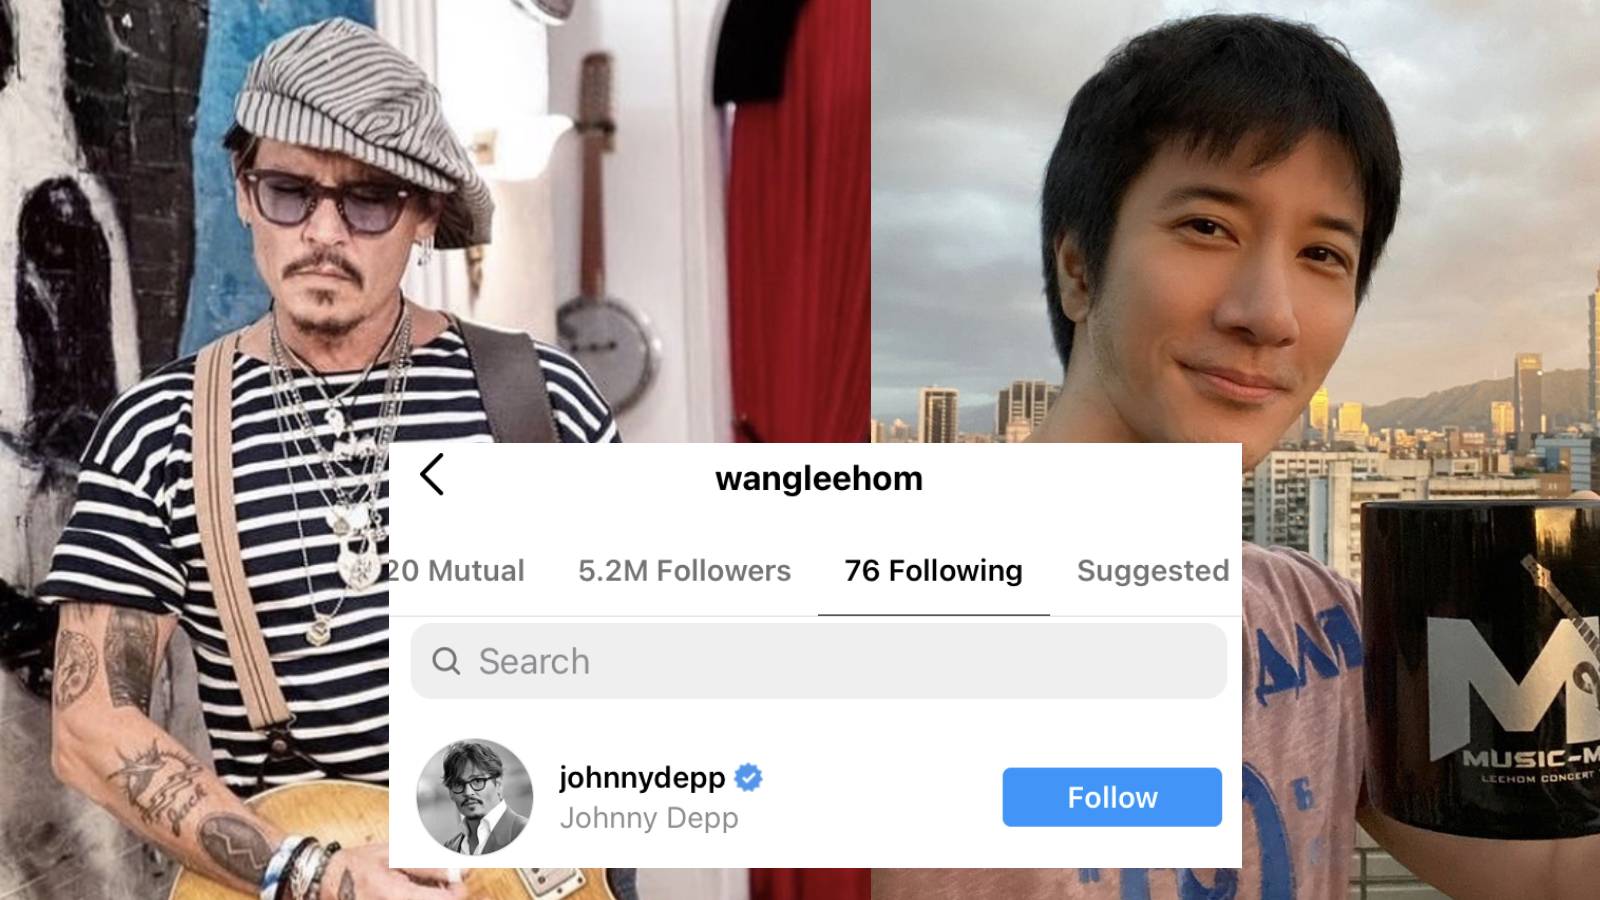 Wang Leehom Follows Johnny Depp On IG; Netizens Wonder If He’s Taking Notes For His Custody Lawsuit Against Ex-Wife